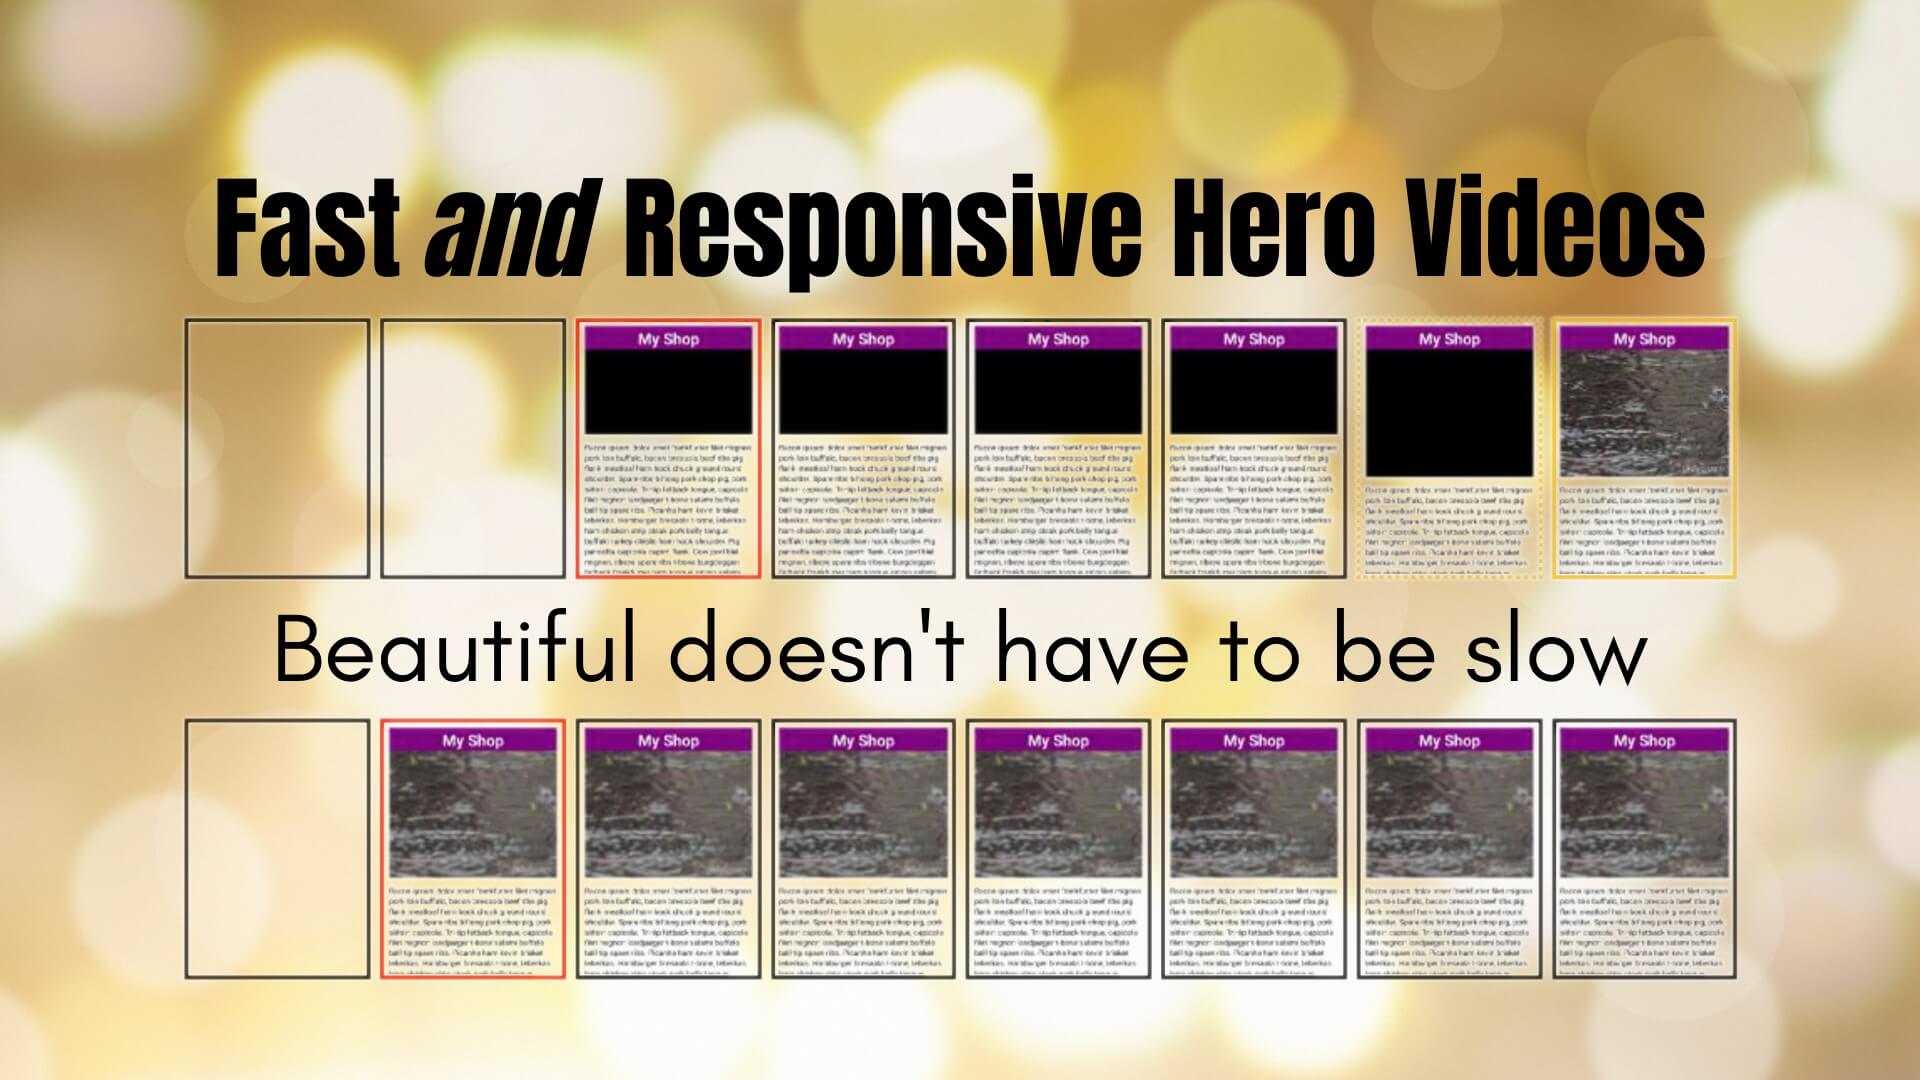 Fast and Responsive Hero Videos for Great UX